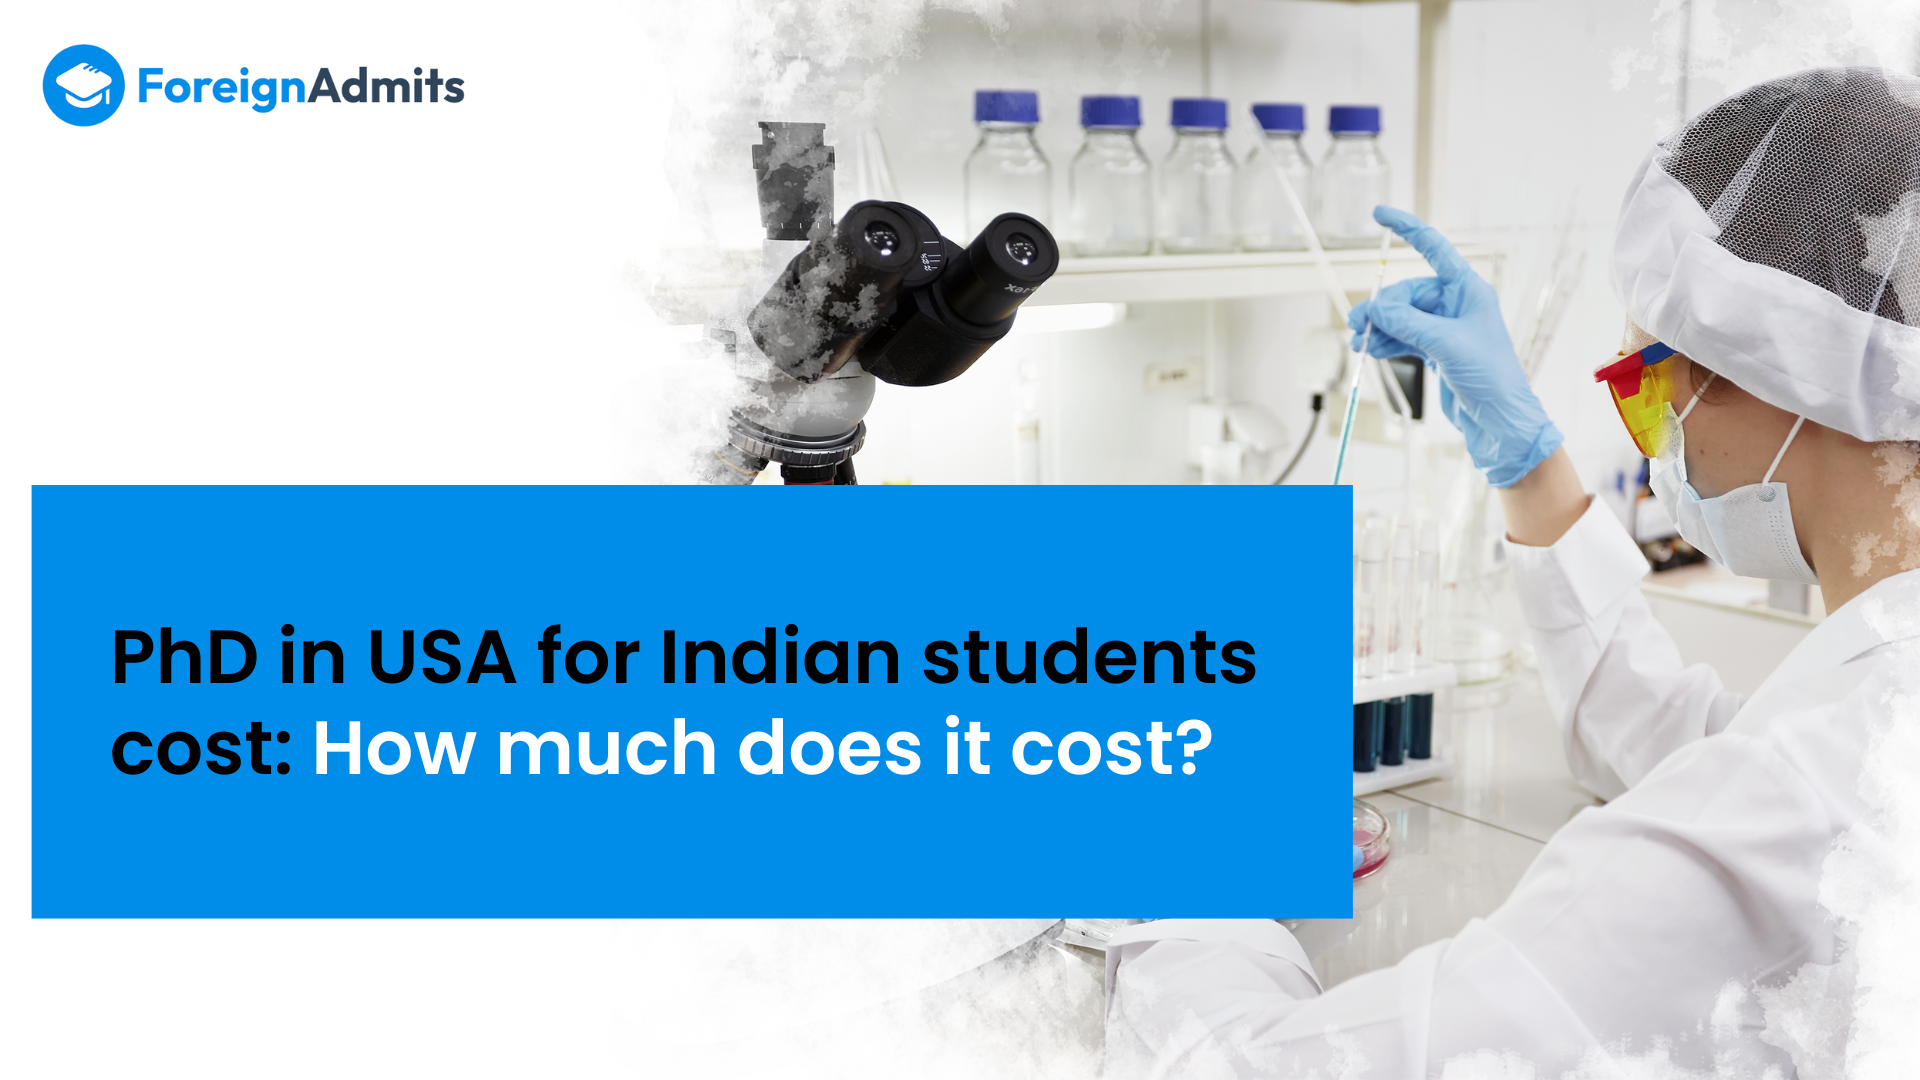 PhD in the USA for Indian students Cost: How much does it cost?